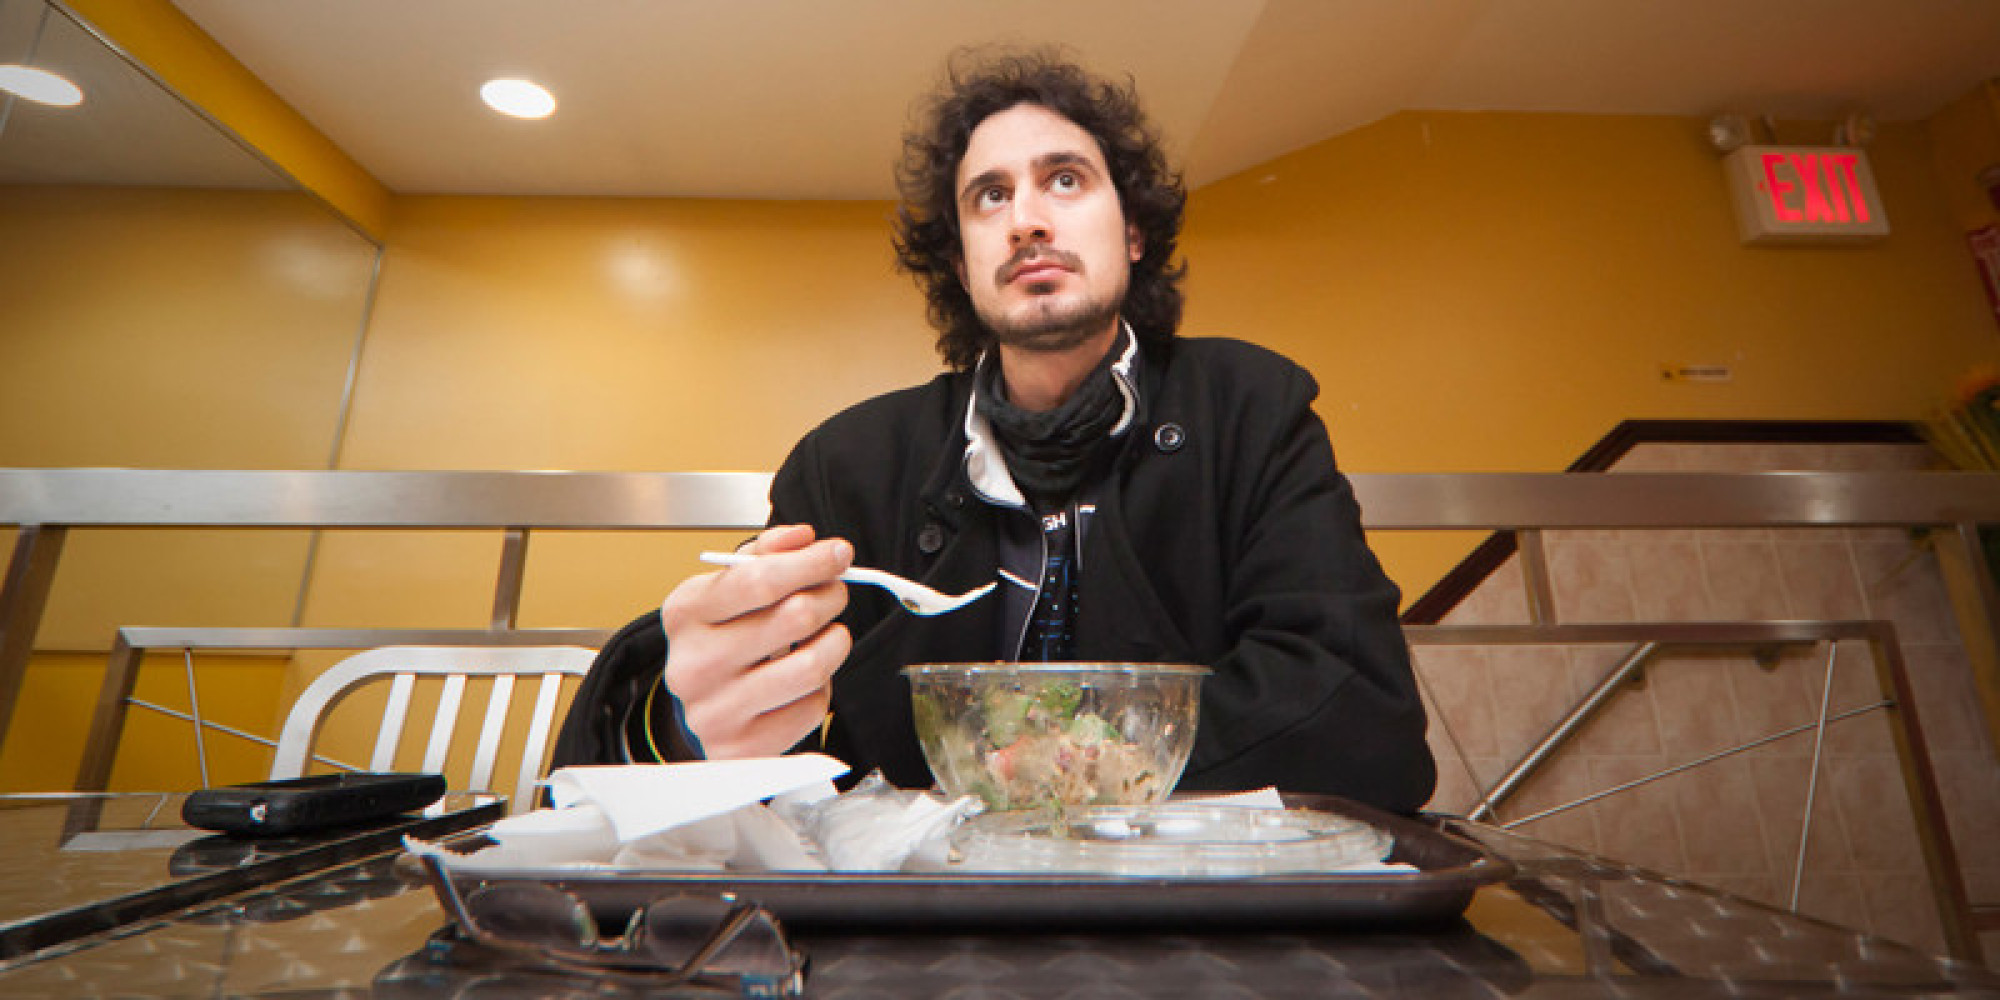 Fascinating Photo Series Shows What Eating Alone Looks Like